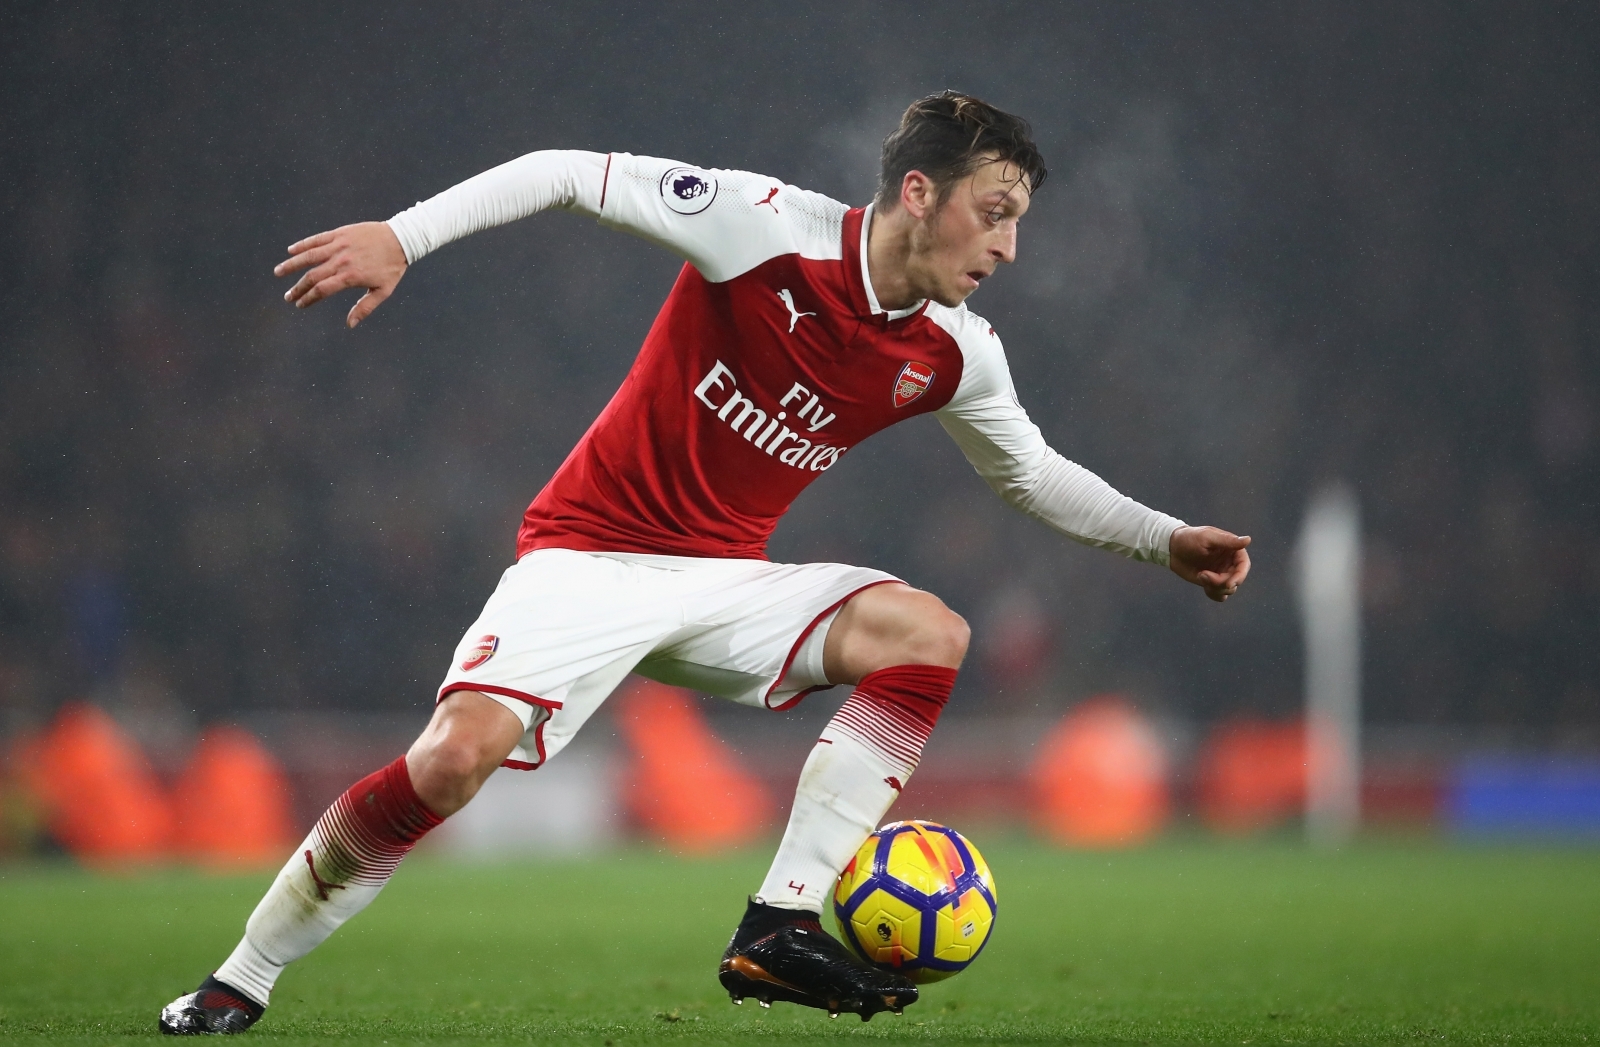 Manchester United urged to sign Arsenal playmaker Mesut Ozil on a free transfer